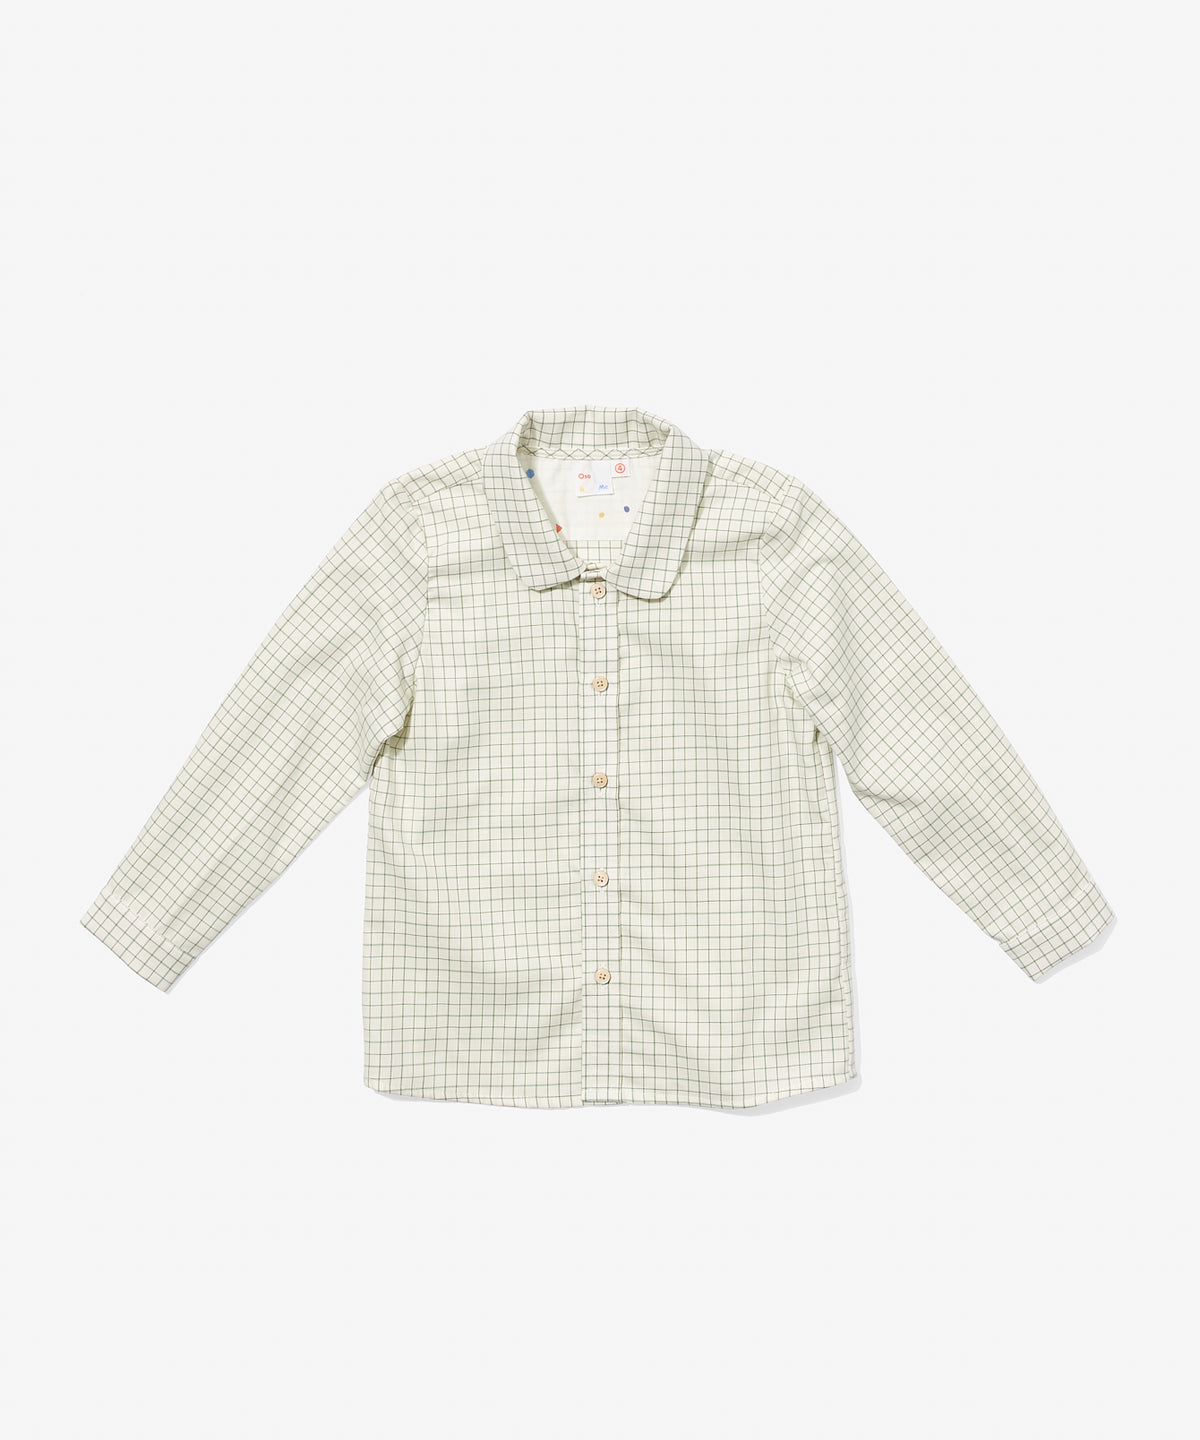 A Collection of Children Clothing Online | Oso & Me